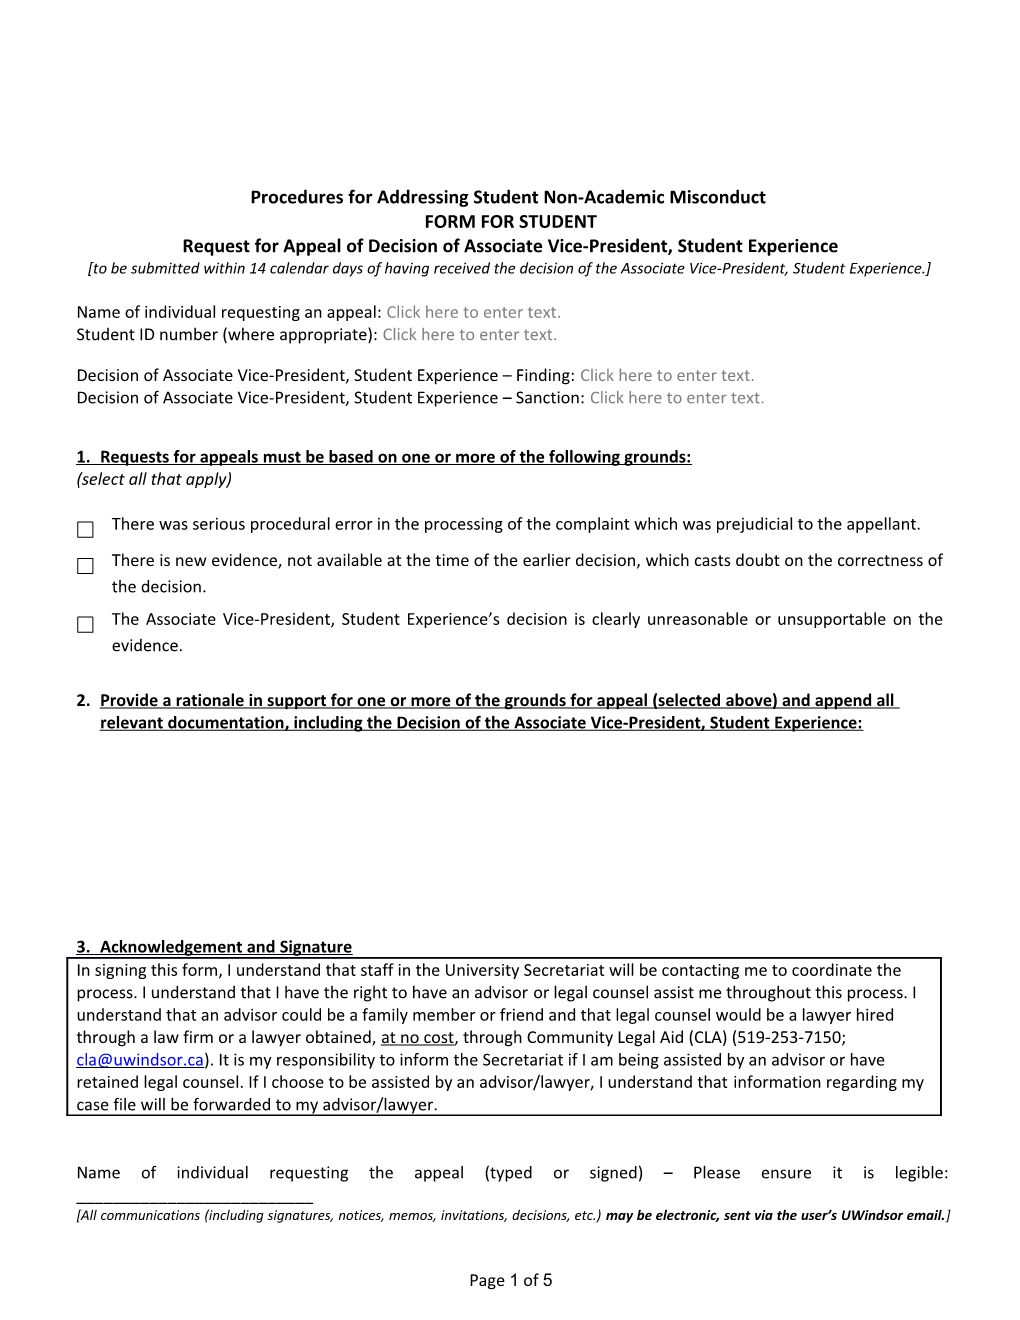 Procedures for Addressing Student Non-Academic Misconduct